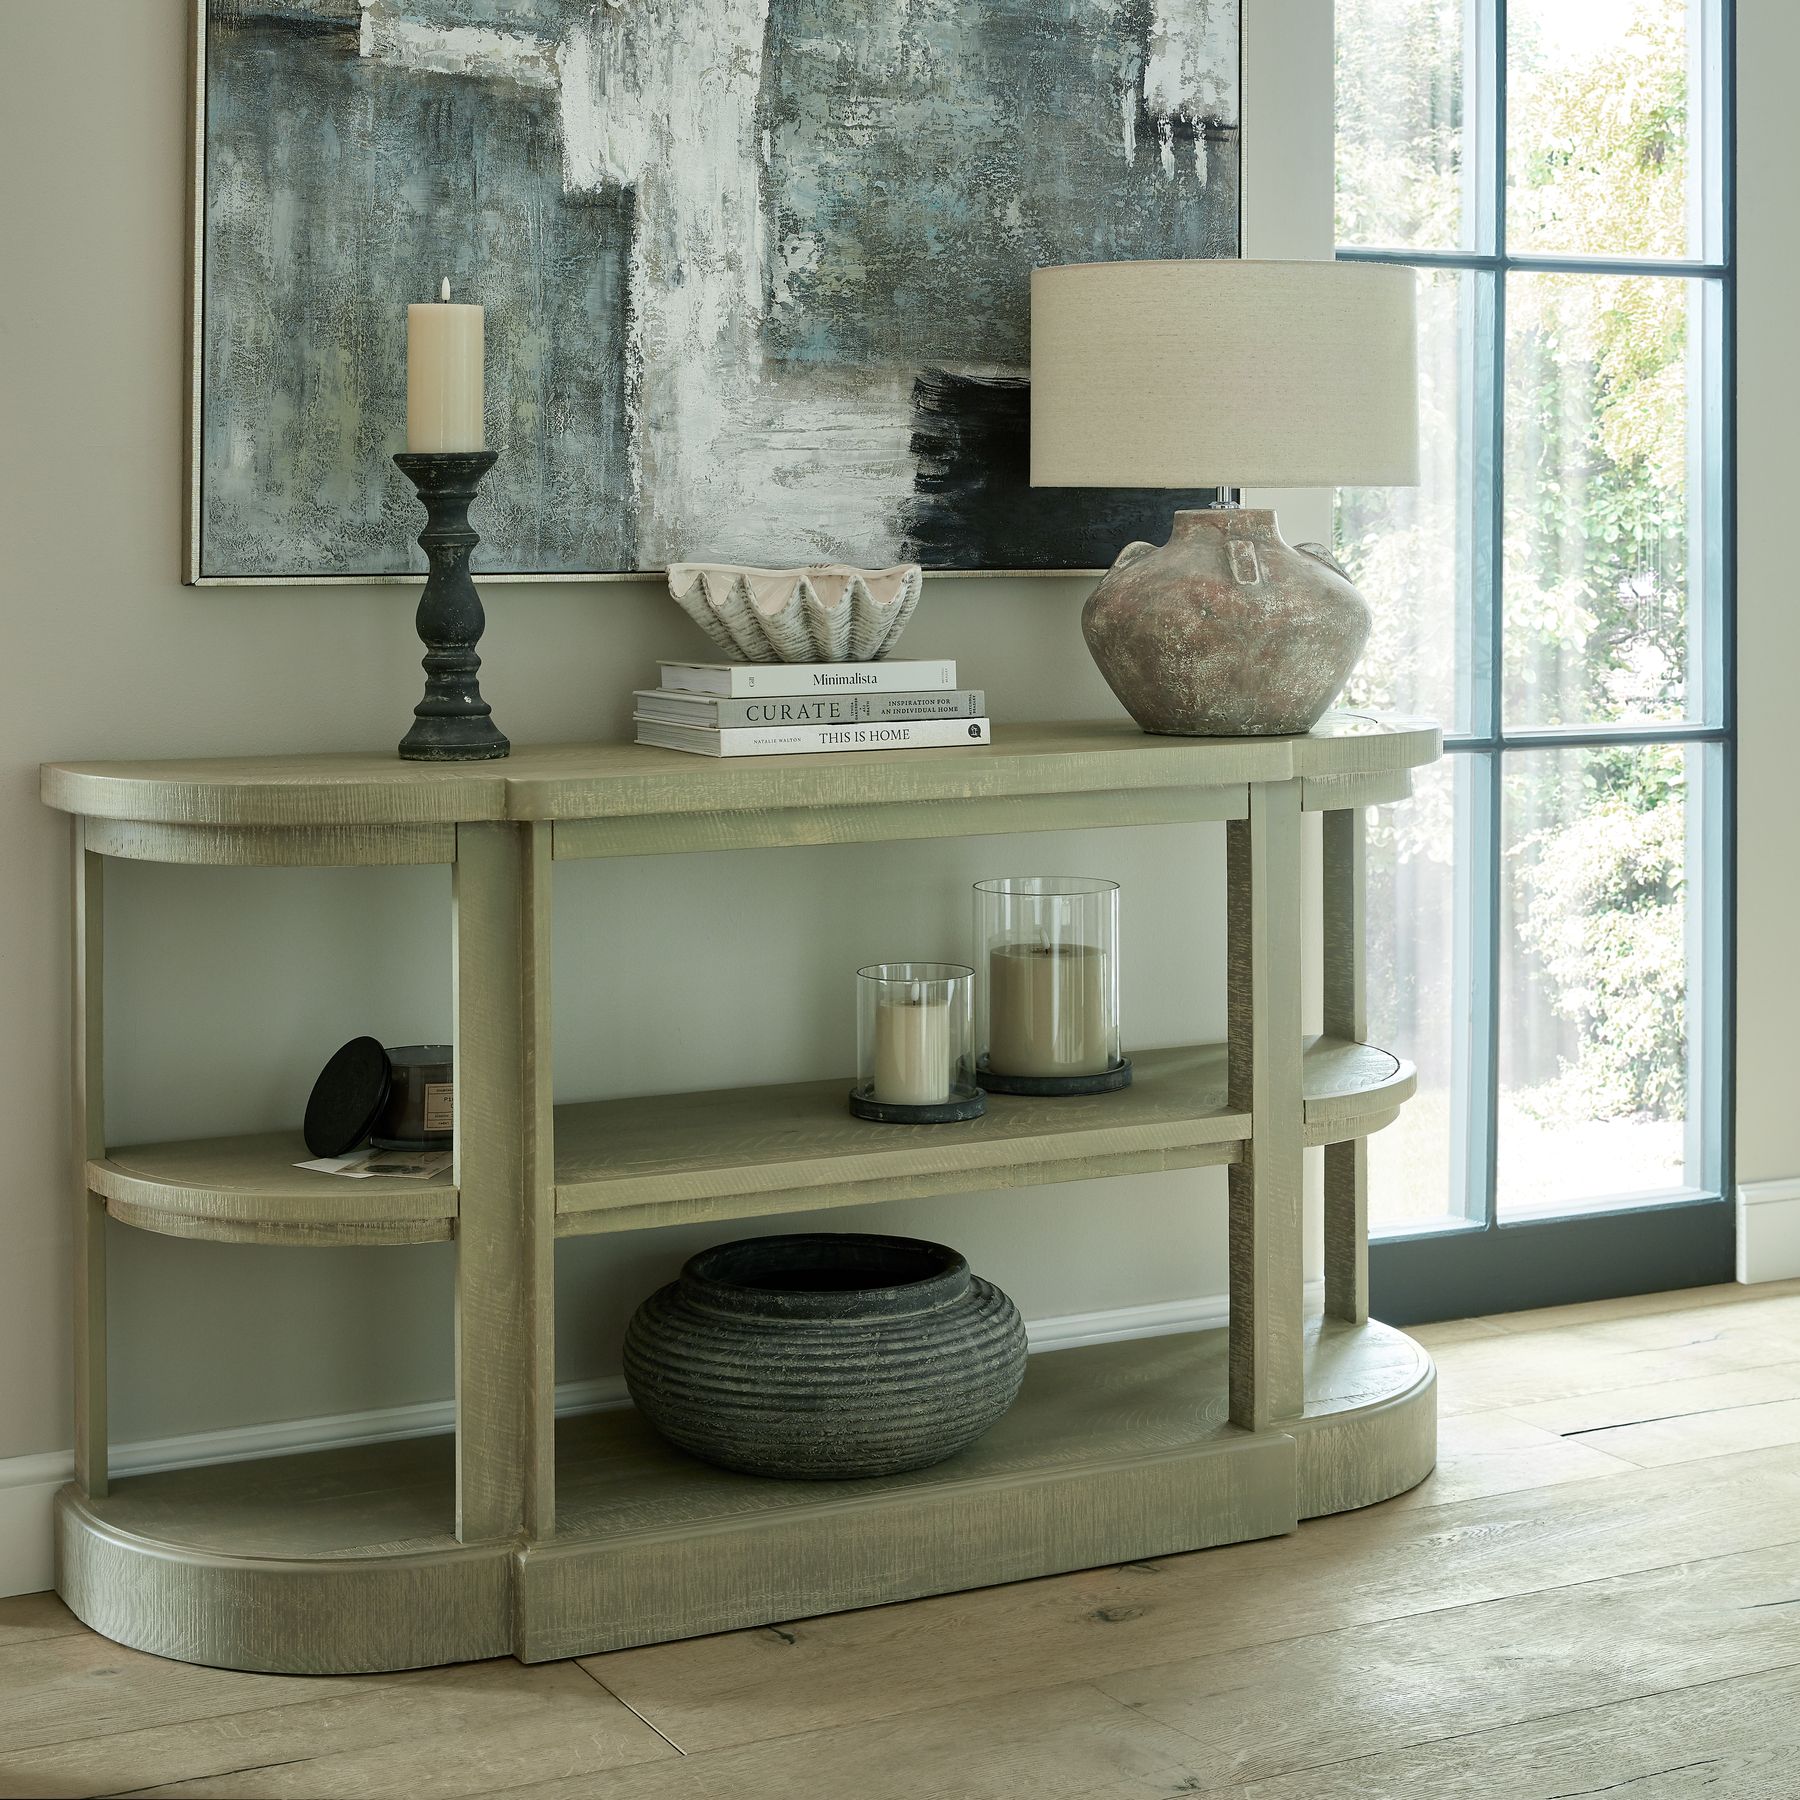 Saltaire Collection 2 Shelf Console Table - Image 5